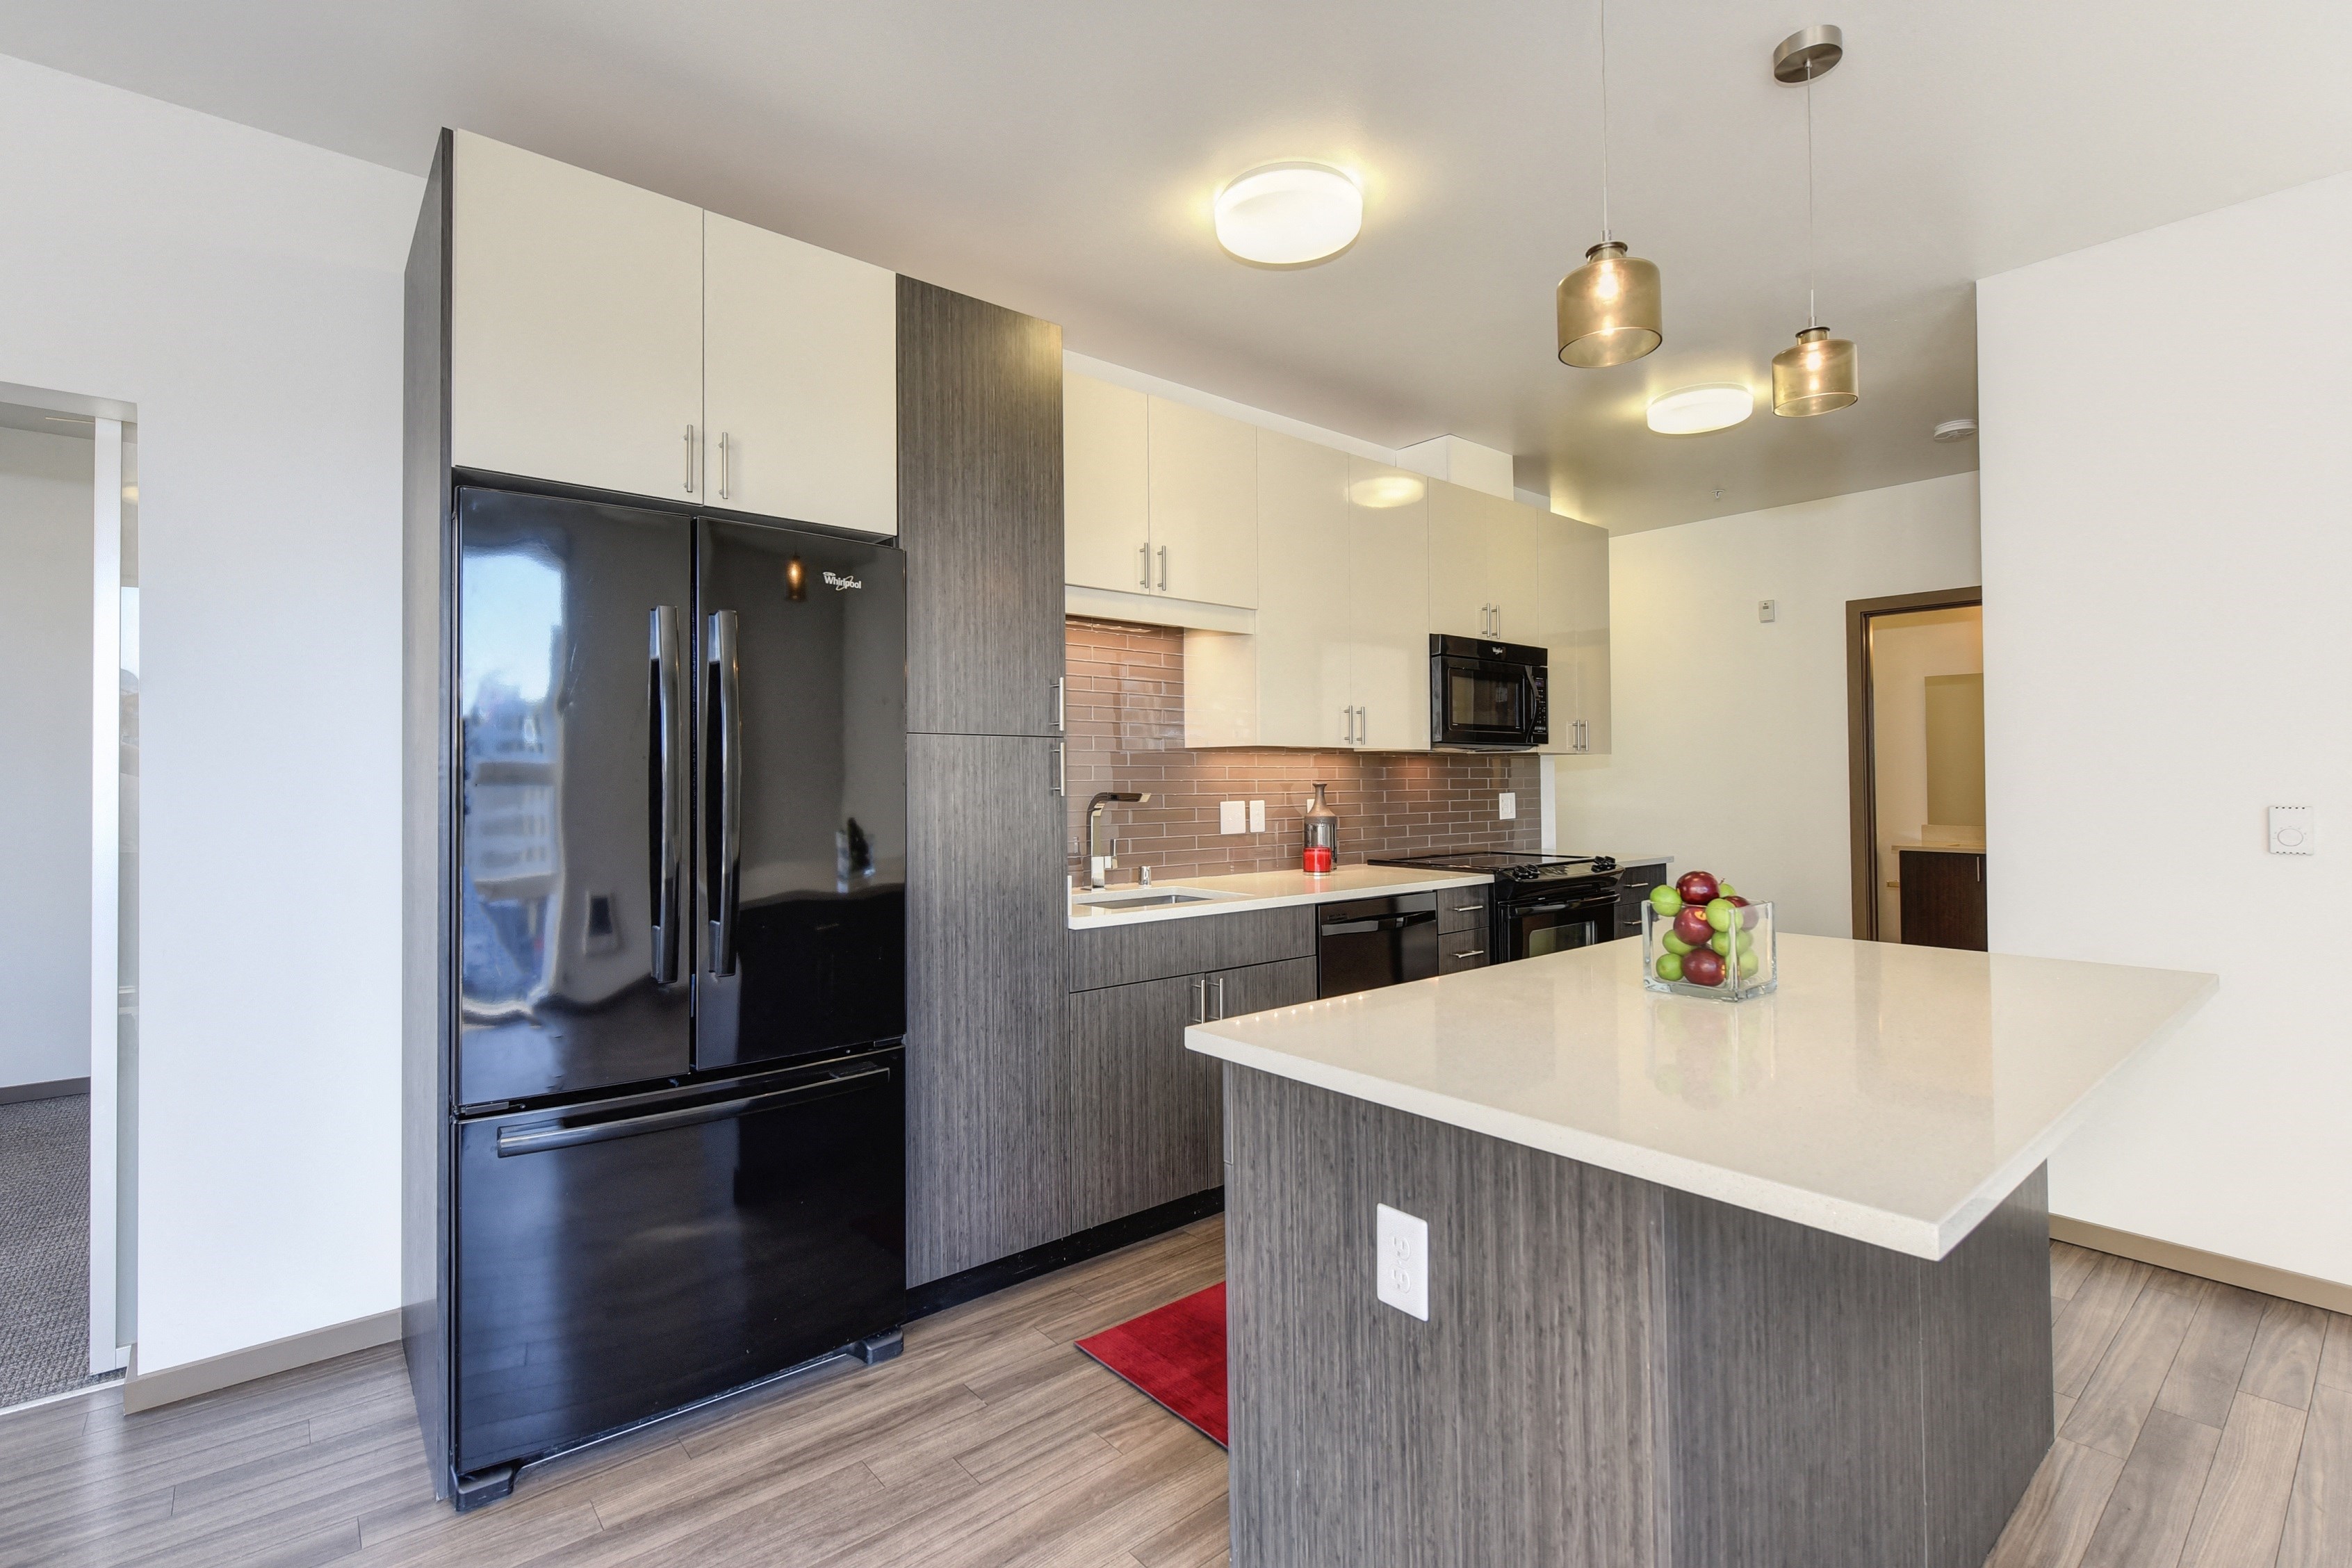 Kitchen with Hardwood Inspired Floor, Refrigerator, Gray Cabinents, Microwave and Bowl of Green/Red Apples